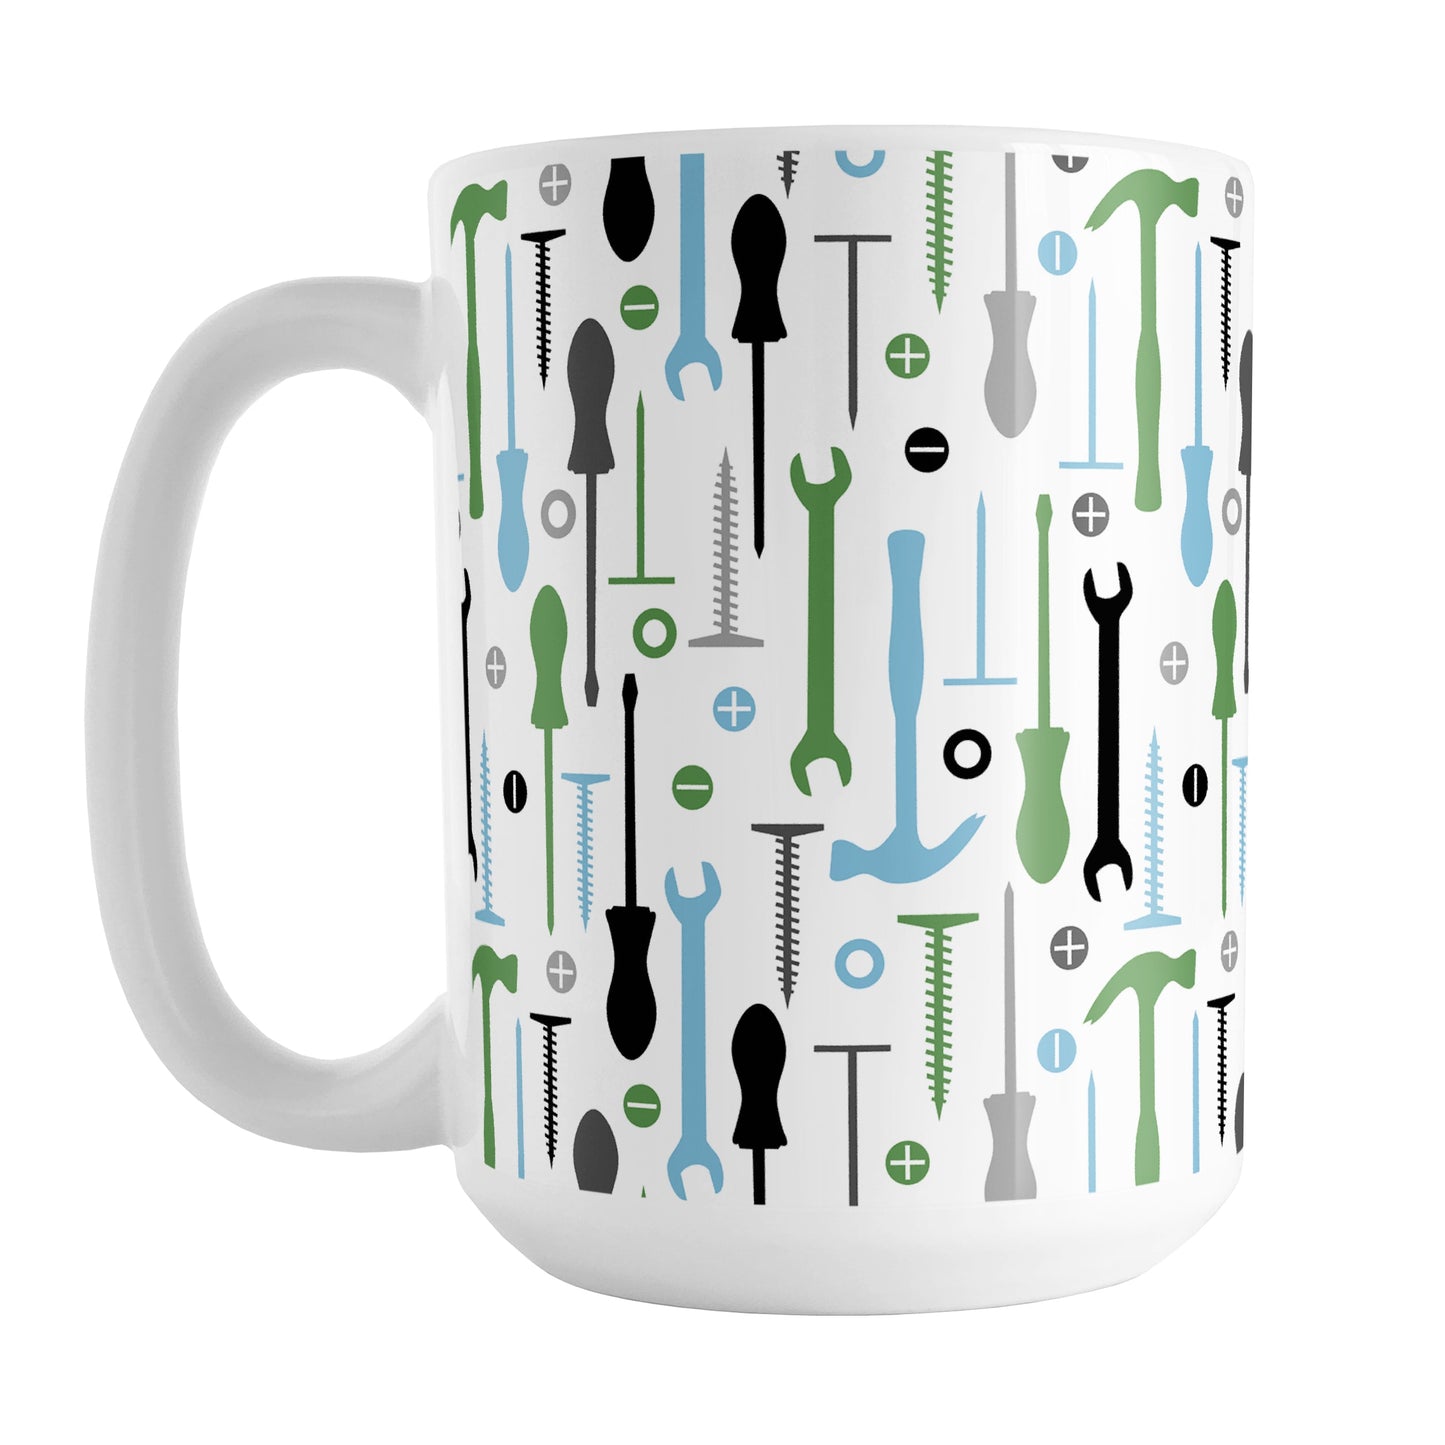 Green Blue Tools Pattern Mug (15oz) at Amy's Coffee Mugs. A ceramic coffee mug with a modern style pattern of tools in green, blue, black, and gray over white that wraps around the mug to the handle. Perfect for any handyman or contractor. 